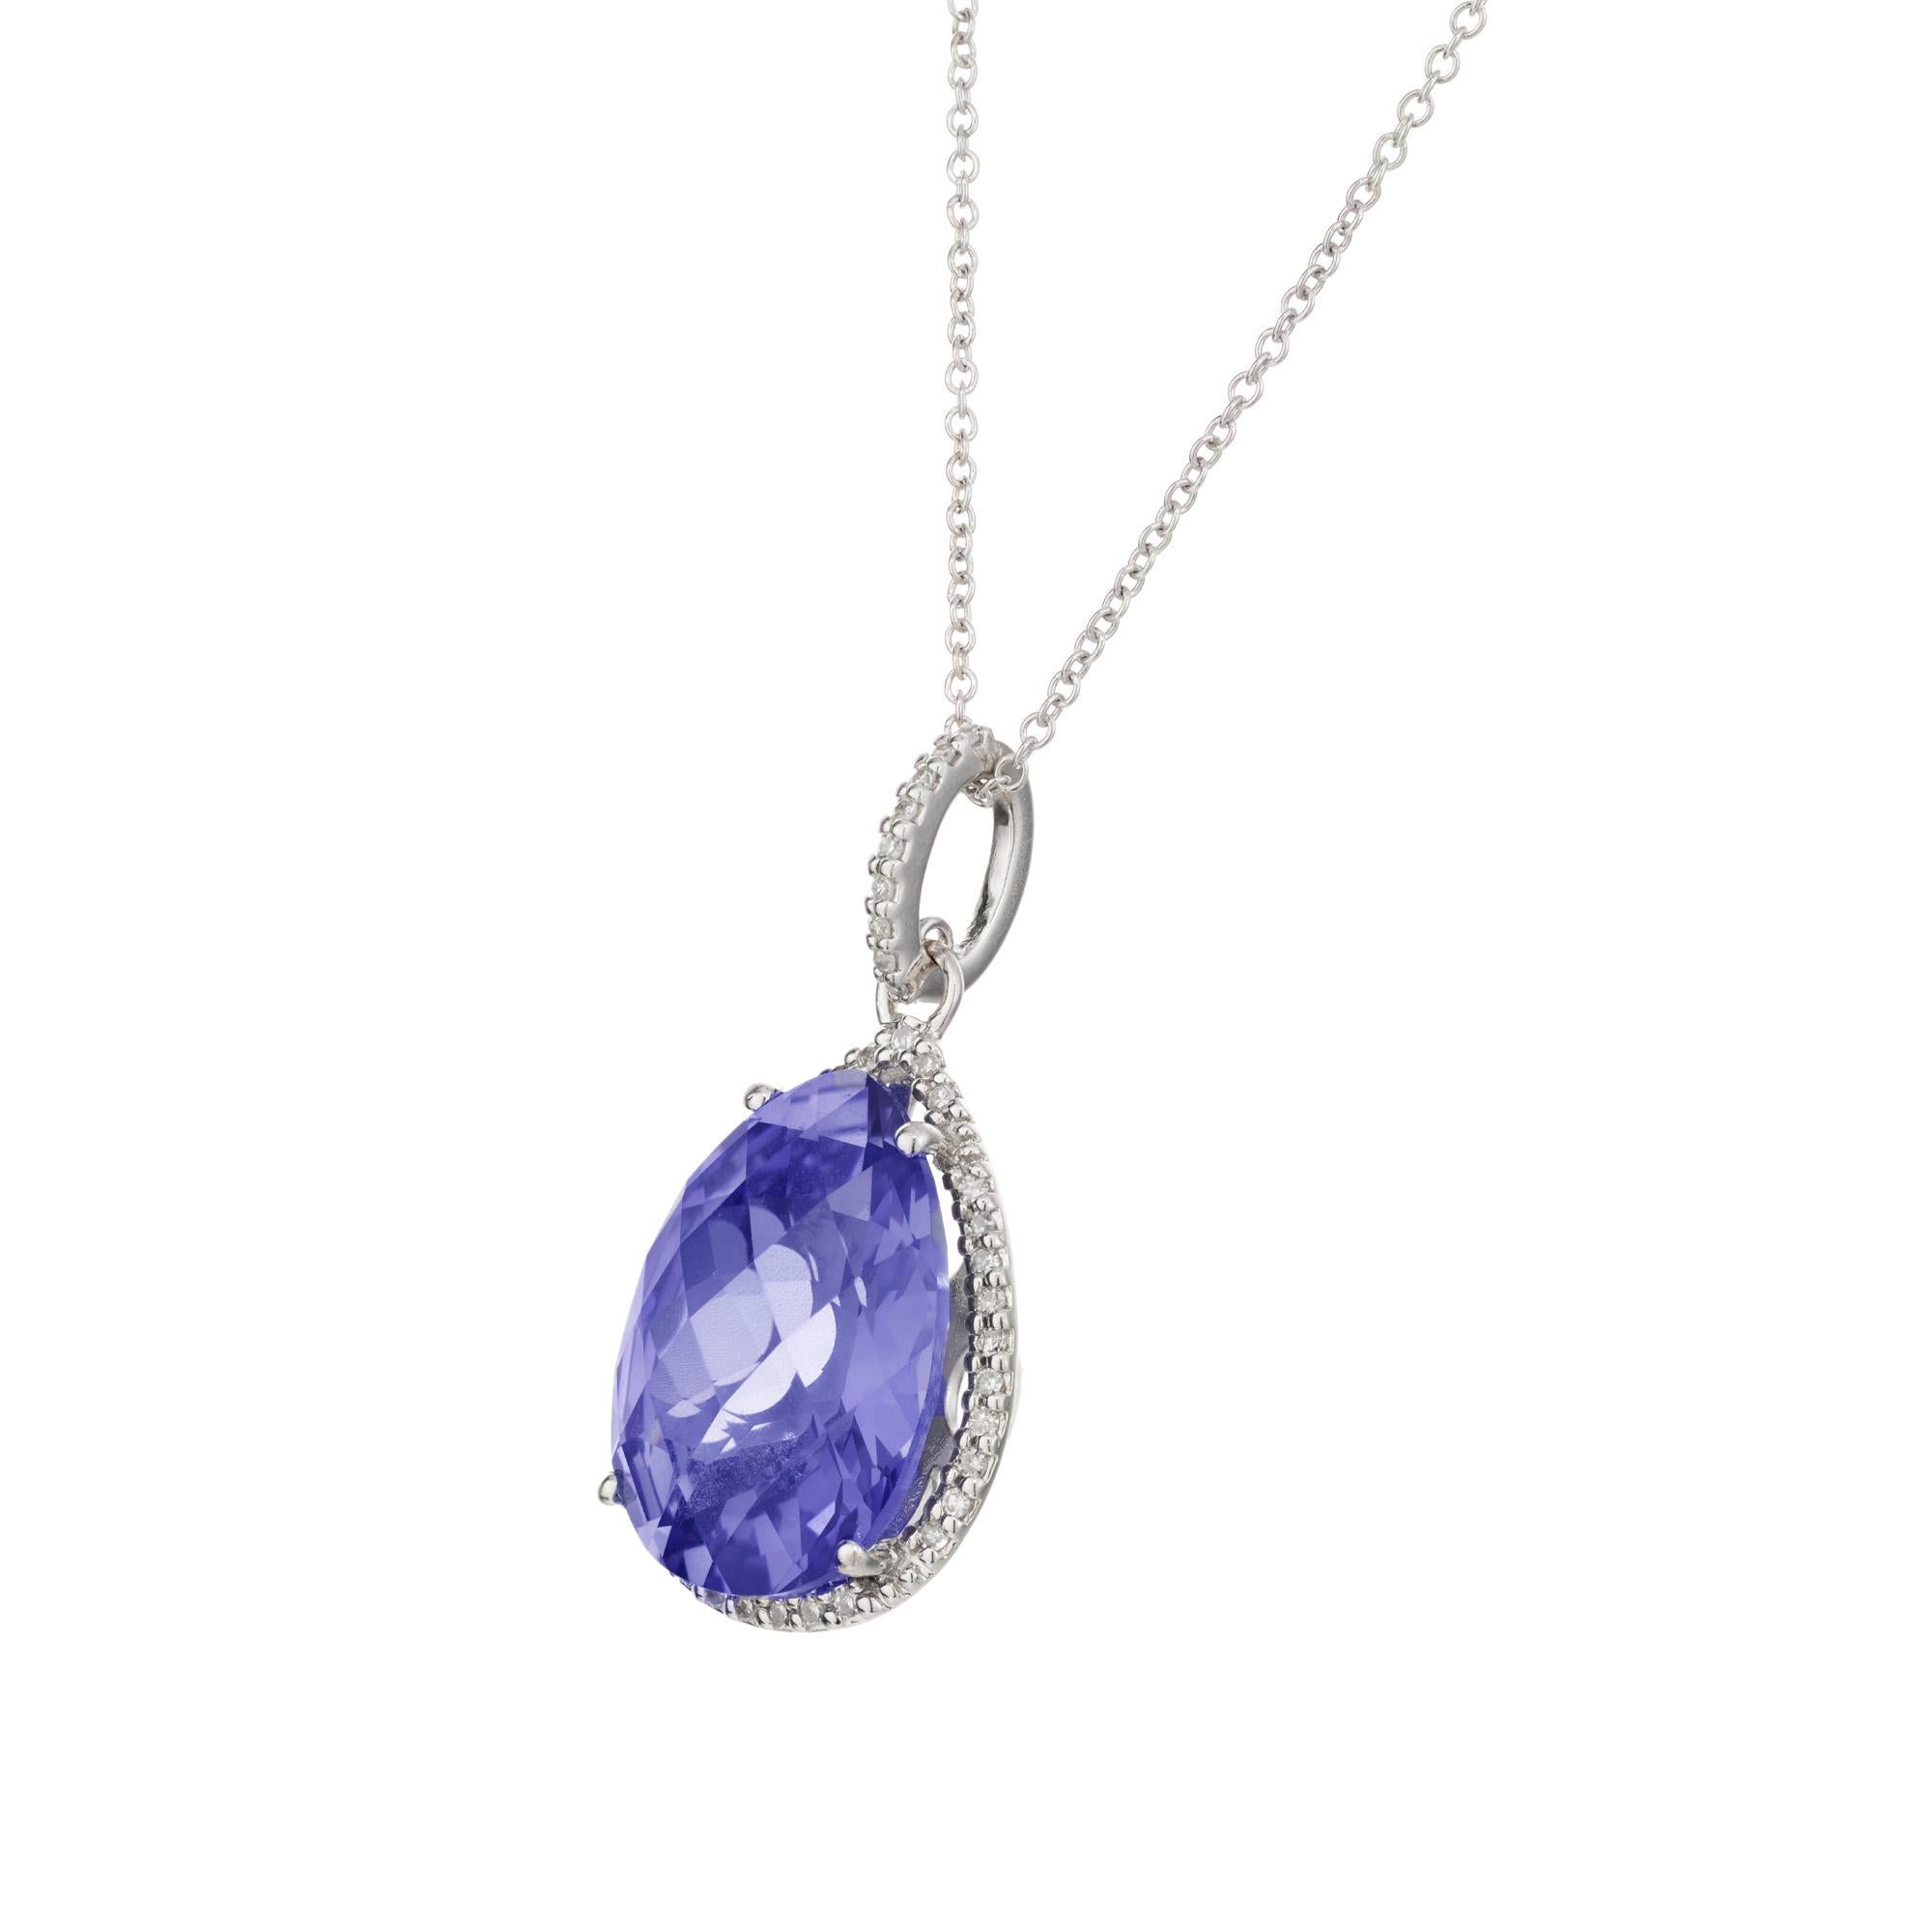 Peter Suchy 7.00 Carat 7.00 Carat Tanzanite Diamond Halo Gold Pendant Necklace  In New Condition For Sale In Stamford, CT